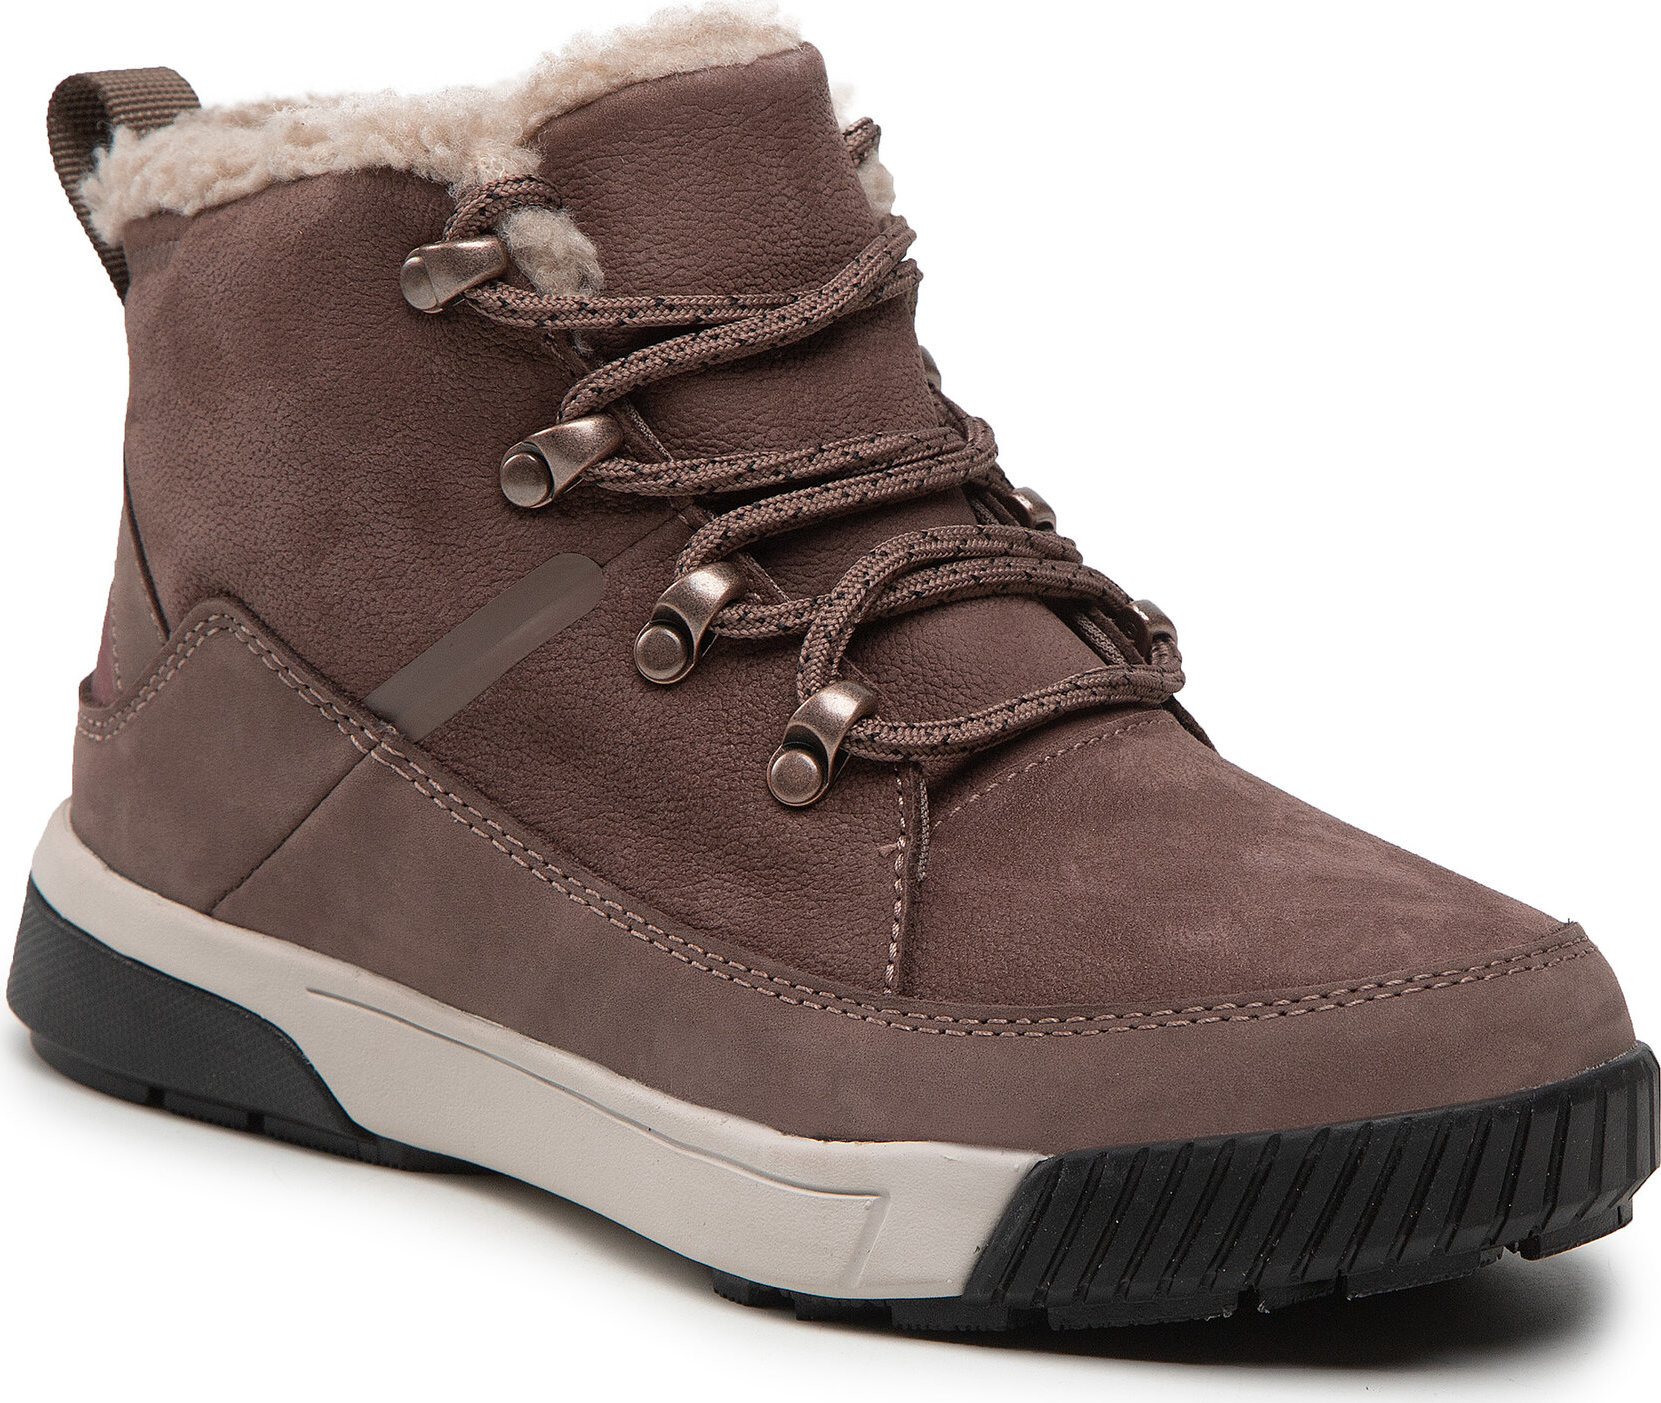 Trekingová obuv The North Face Sierra Mid Lace Wp NF0A4T3X7T71 Deep Taupe/Wild Ginger